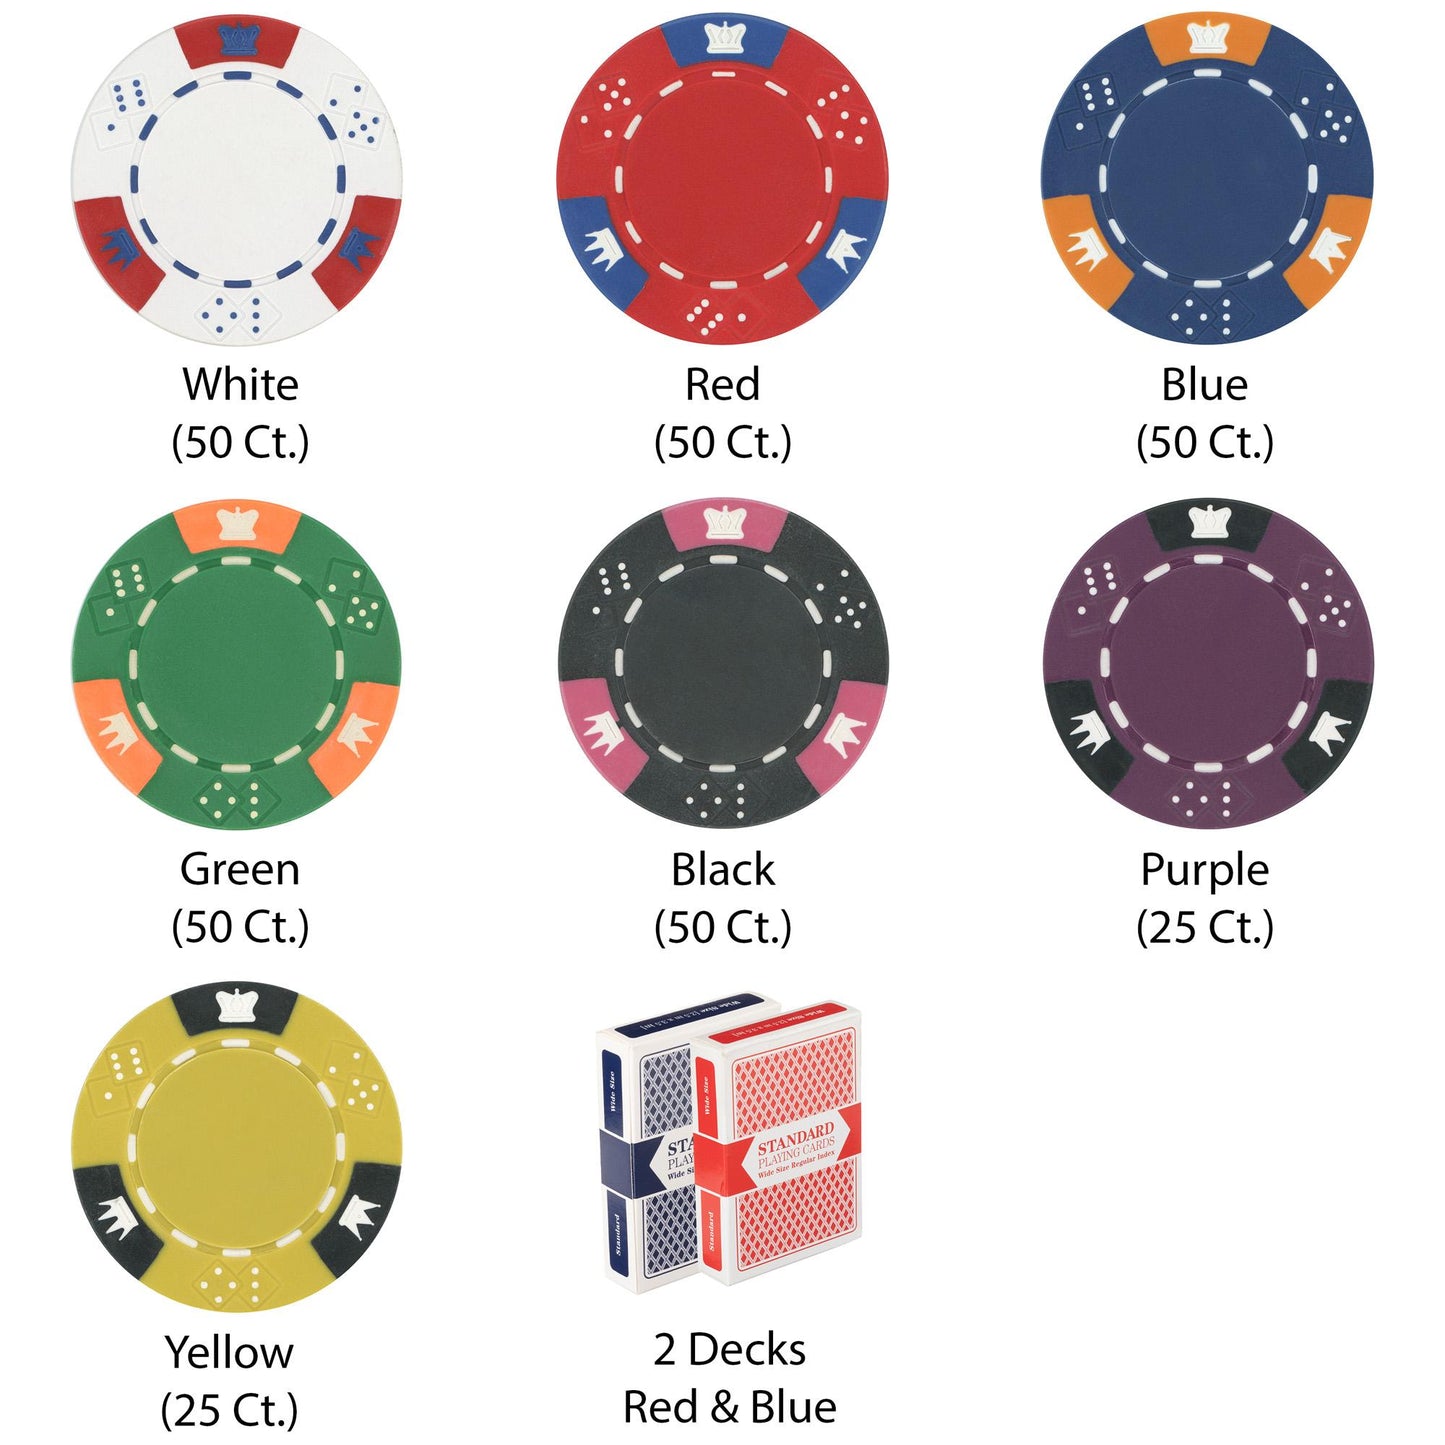 300 Crown and Dice Poker Chips with Wooden Carousel